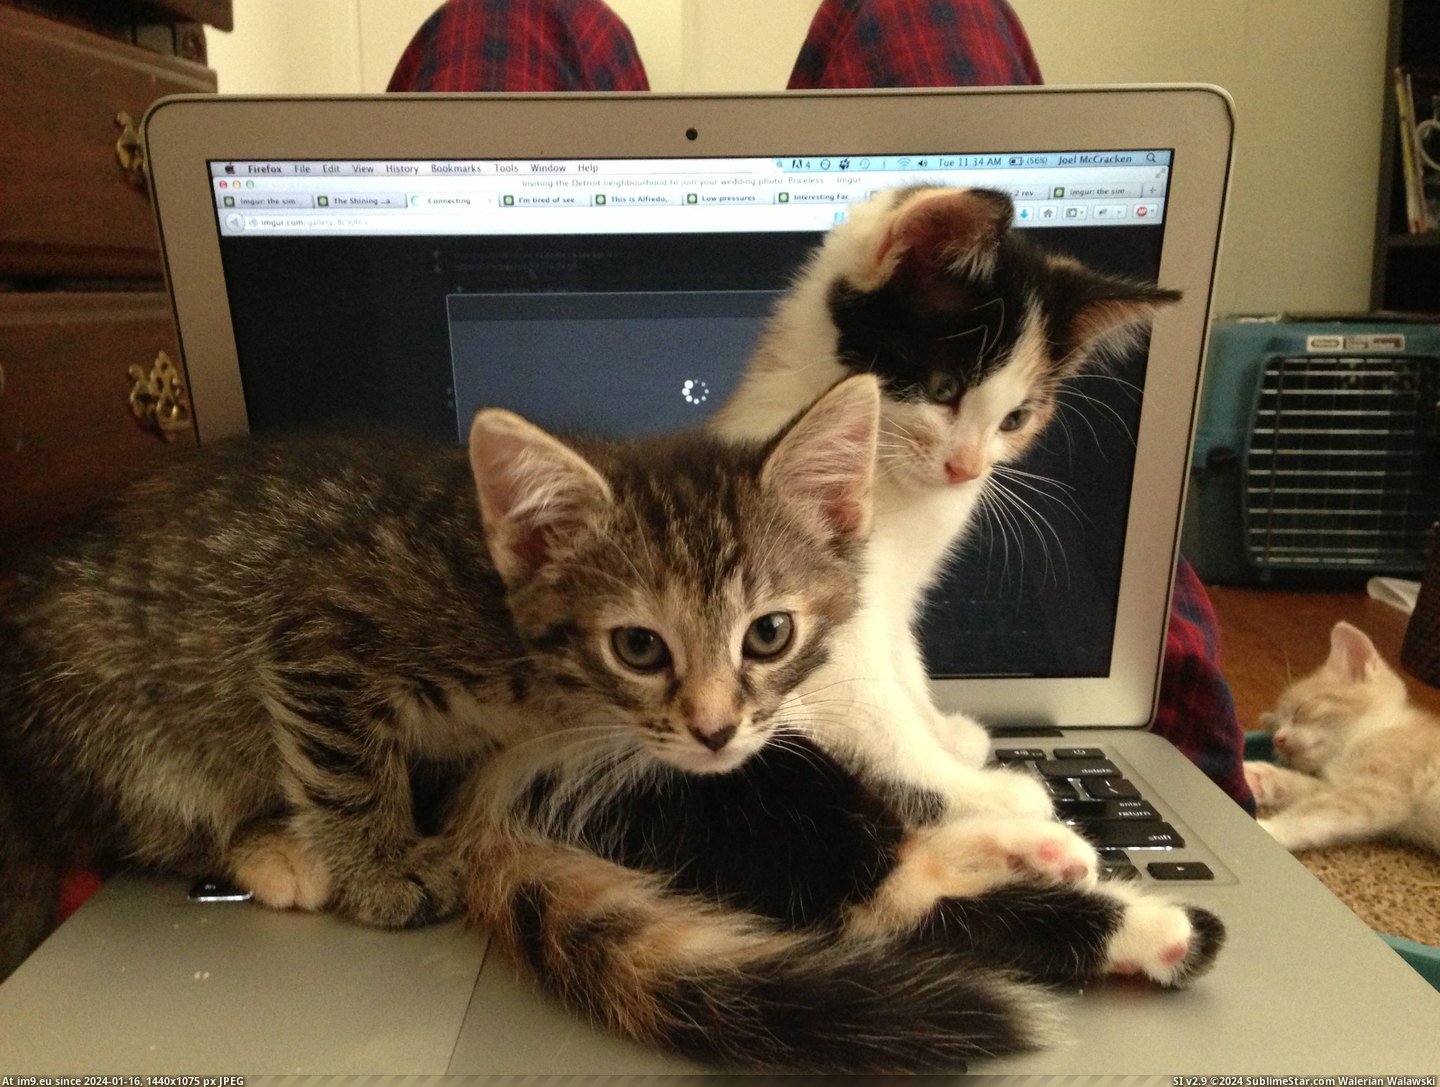 #Cats #Room #Foster #Silly #Laptop #Thought #Kittens [Cats] Thought I could be on my laptop in a room with 7 foster kittens. Silly me. Pic. (Image of album My r/CATS favs))